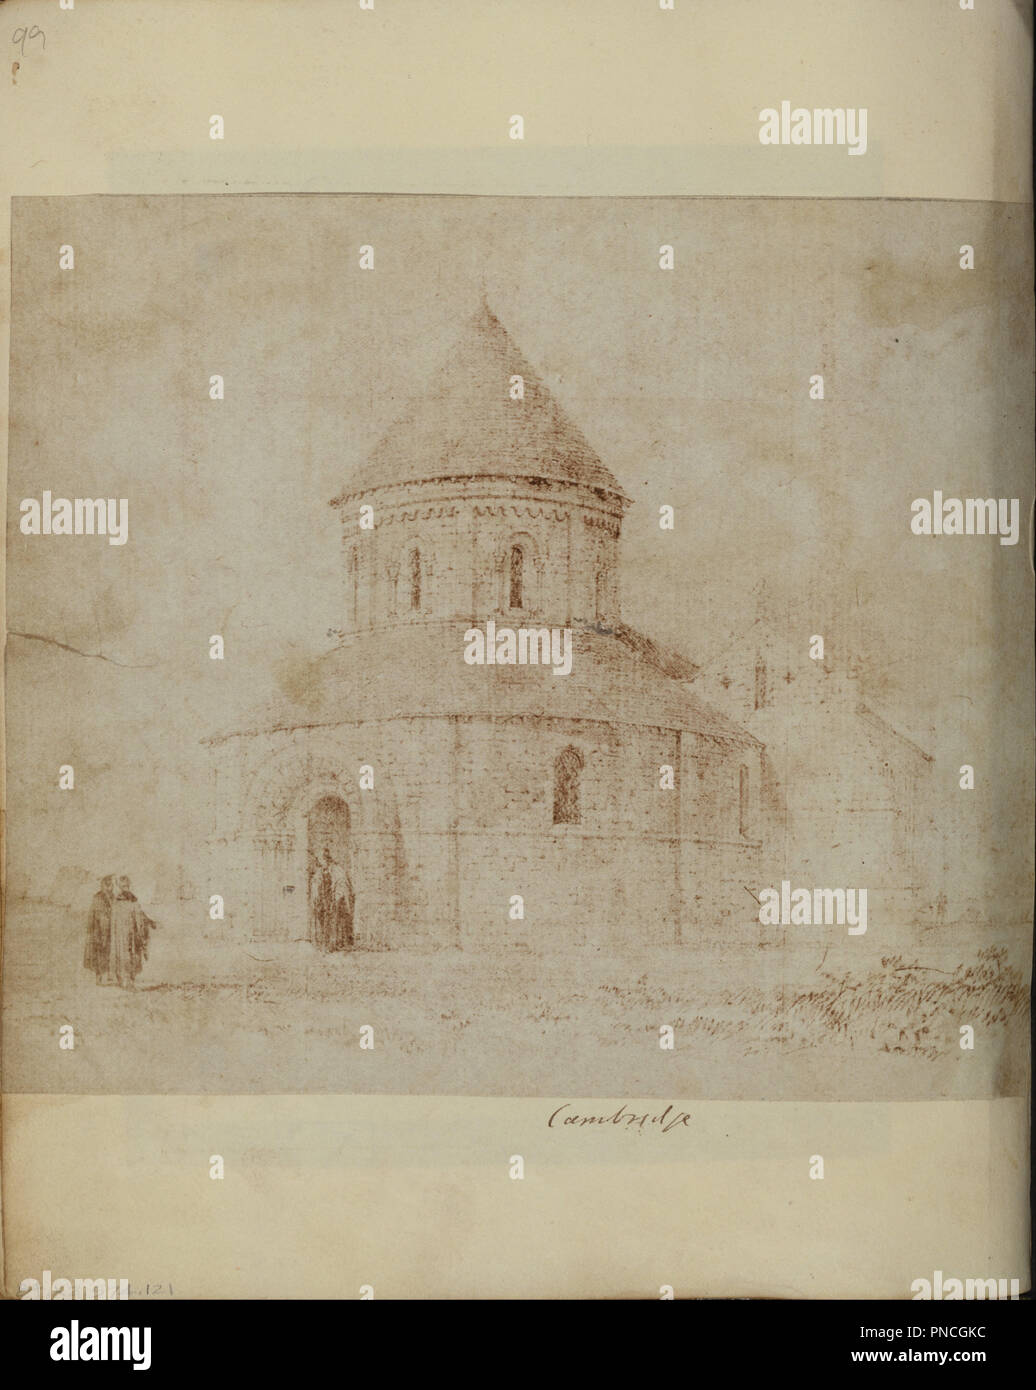 The Church of the Holy Sepulchre and Saint Andrew, Cambridge. Date/Period: After 1841. Print. Salt, probably from a photogenic drawing negative. Height: 156 mm (6.14 in); Width: 181 mm (7.12 in). Author: Unknown maker, British. Stock Photo